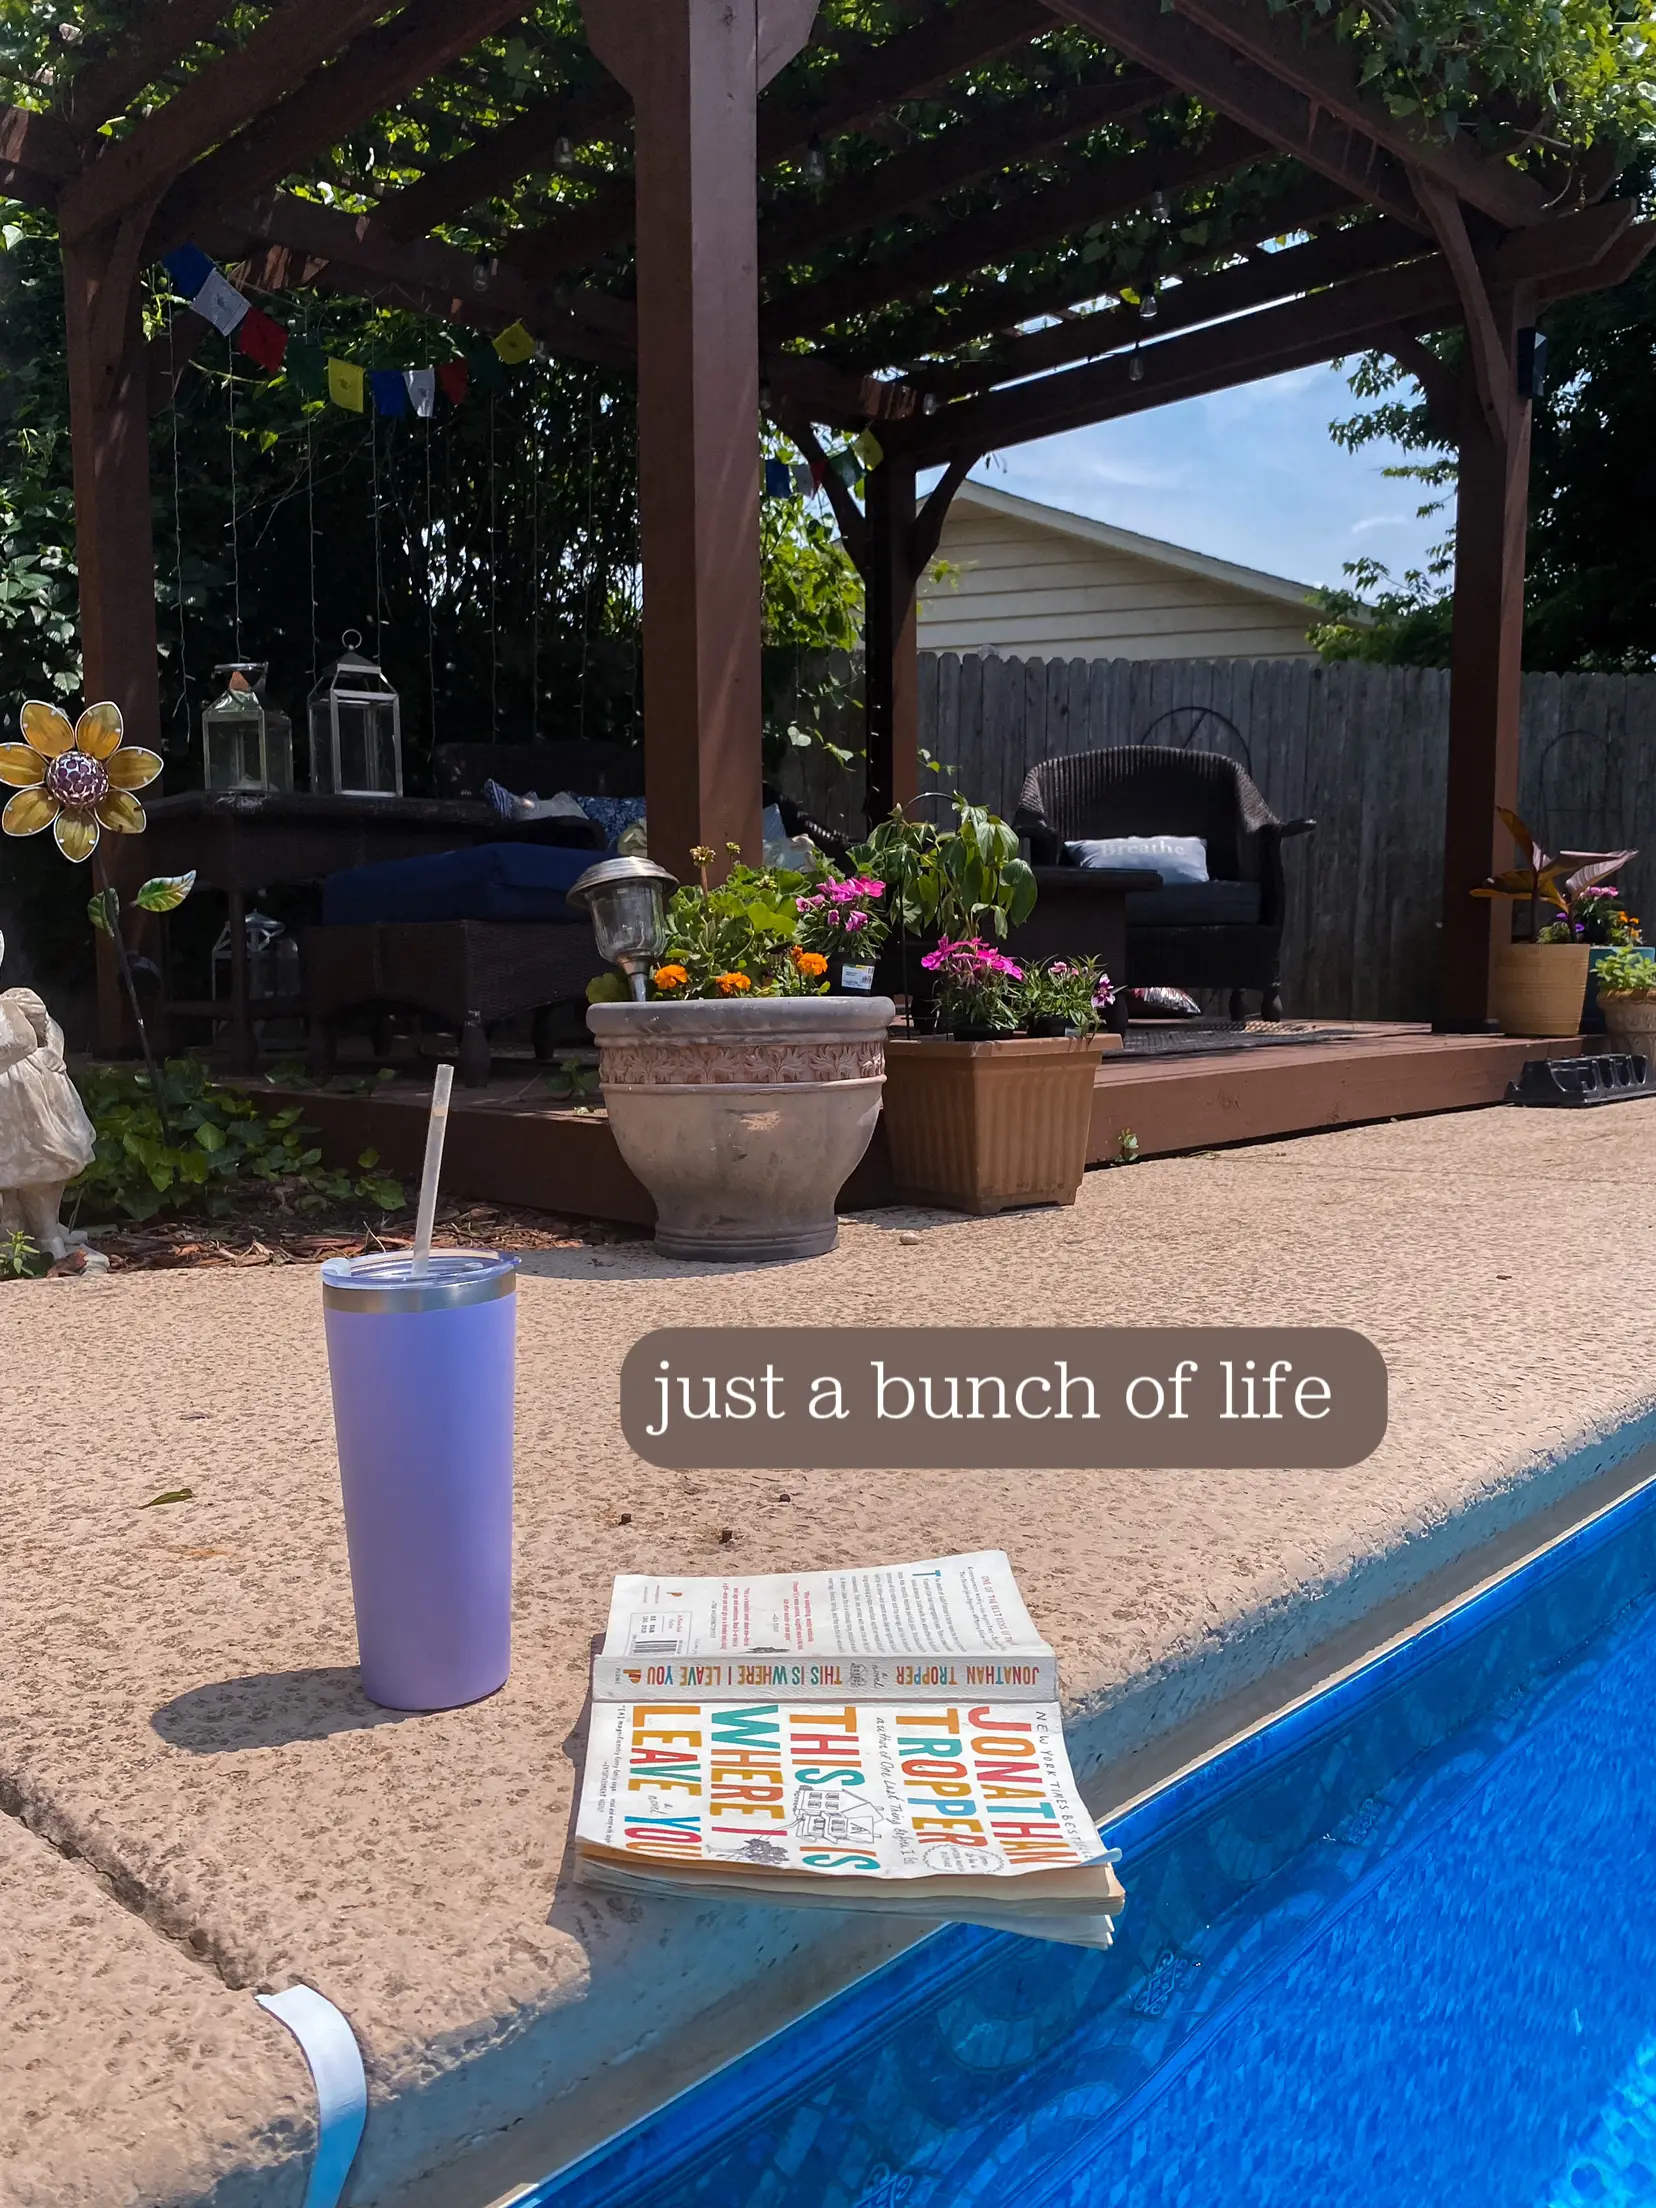  A book of puzzles is laying on a blanket on a patio.